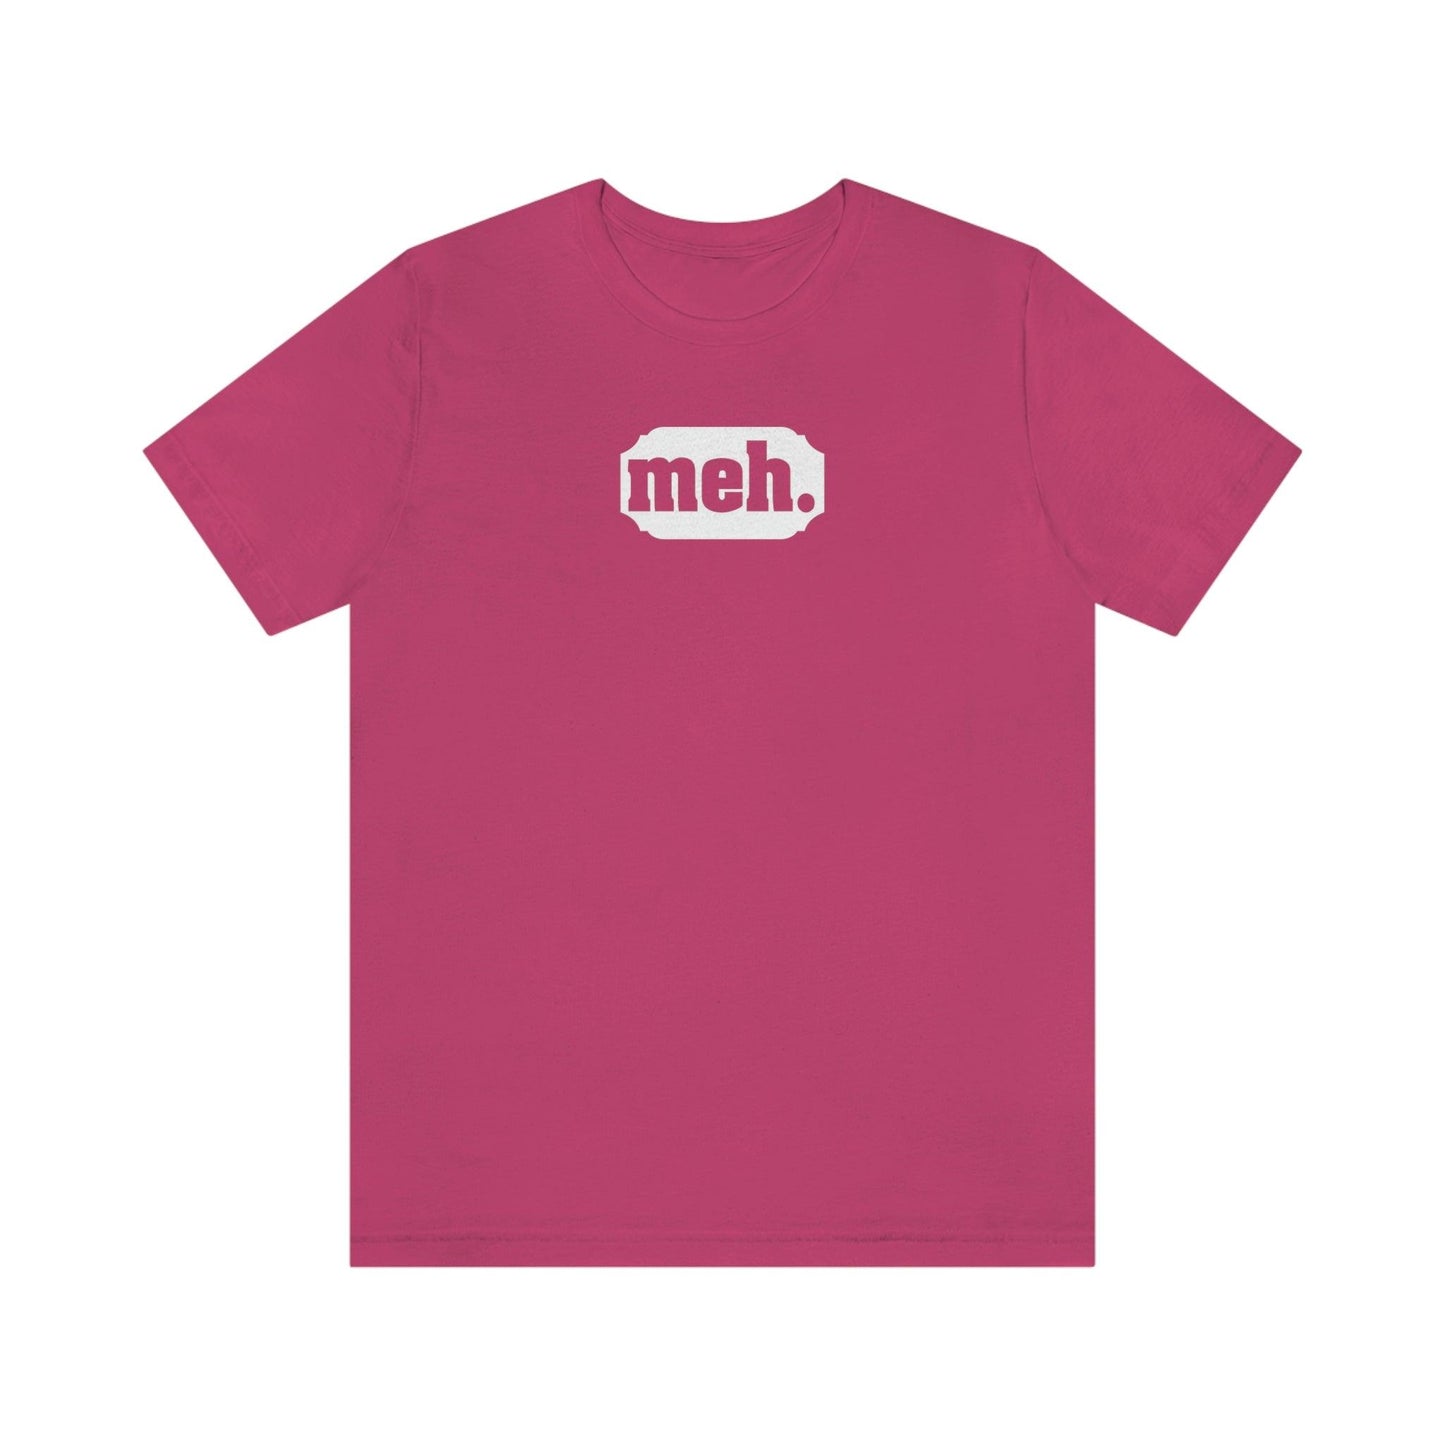 Meh - Wicked Naughty Apparel